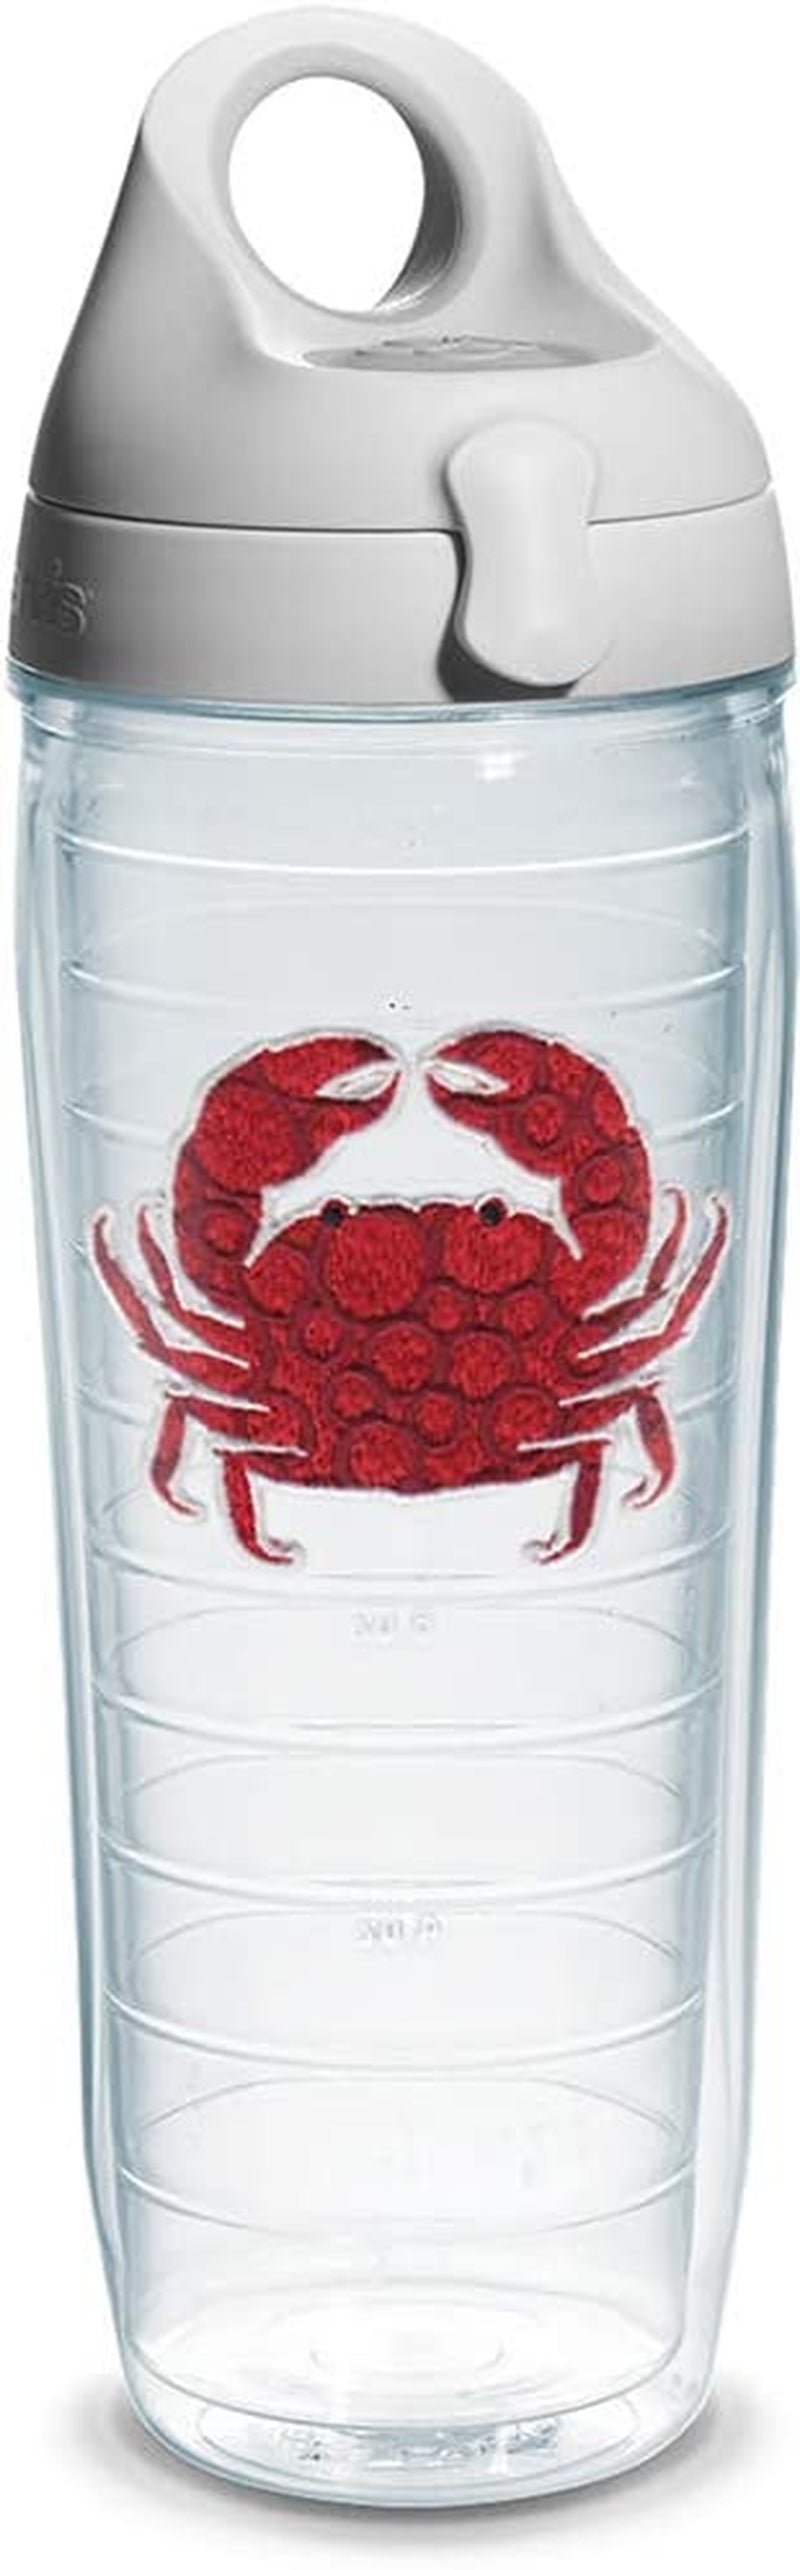 Tervis Crab Insulated Tumbler with Emblem and Red Lid, 16 Oz, Clear Home & Garden > Kitchen & Dining > Tableware > Drinkware Tervis Gray Lid 24oz Water Bottle 